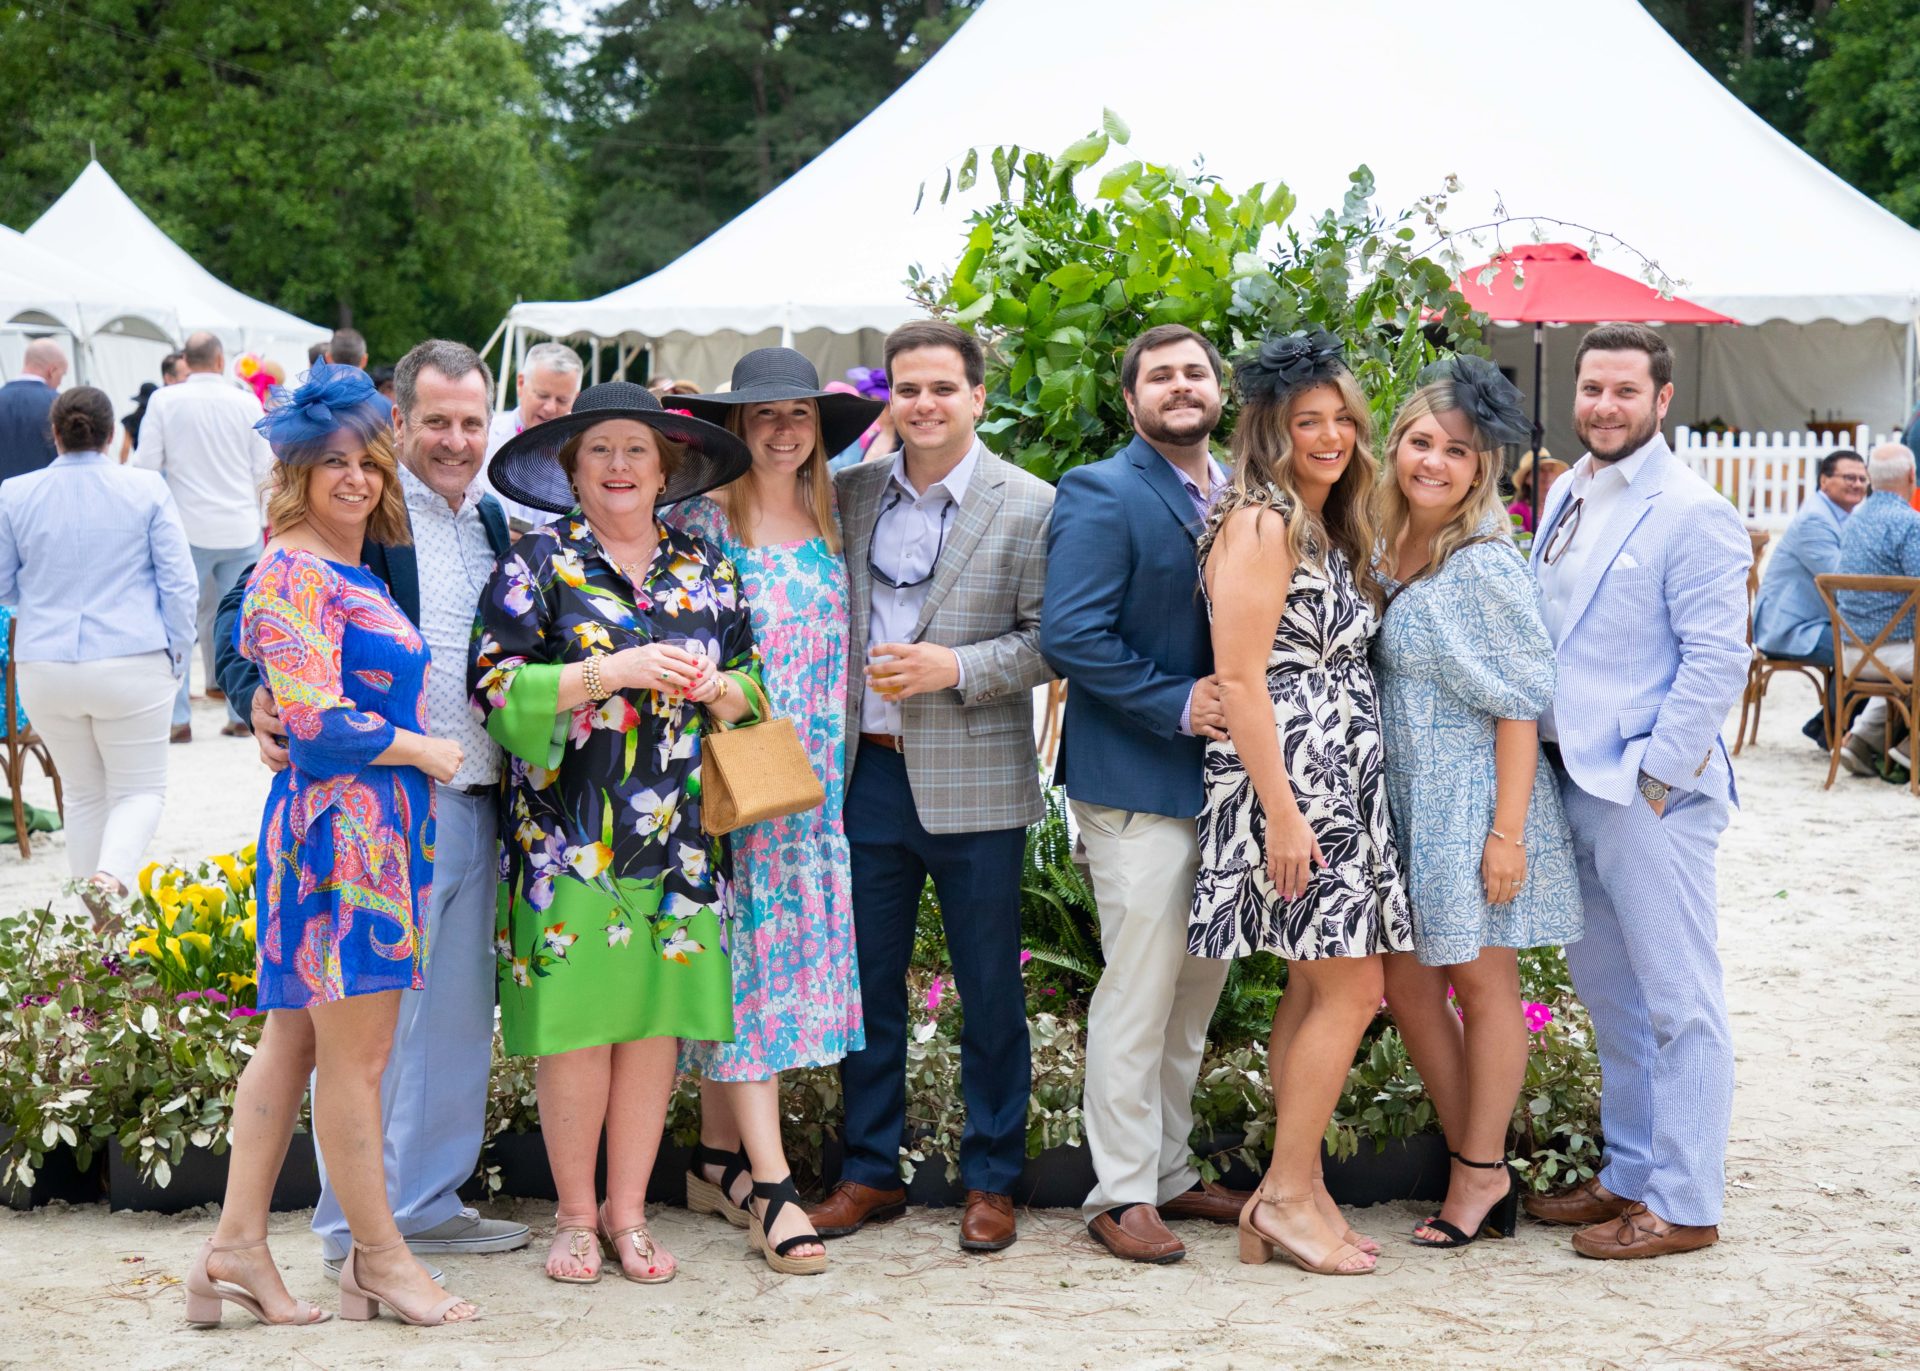 Guests enjoying Shepherd's annual Derby Day event